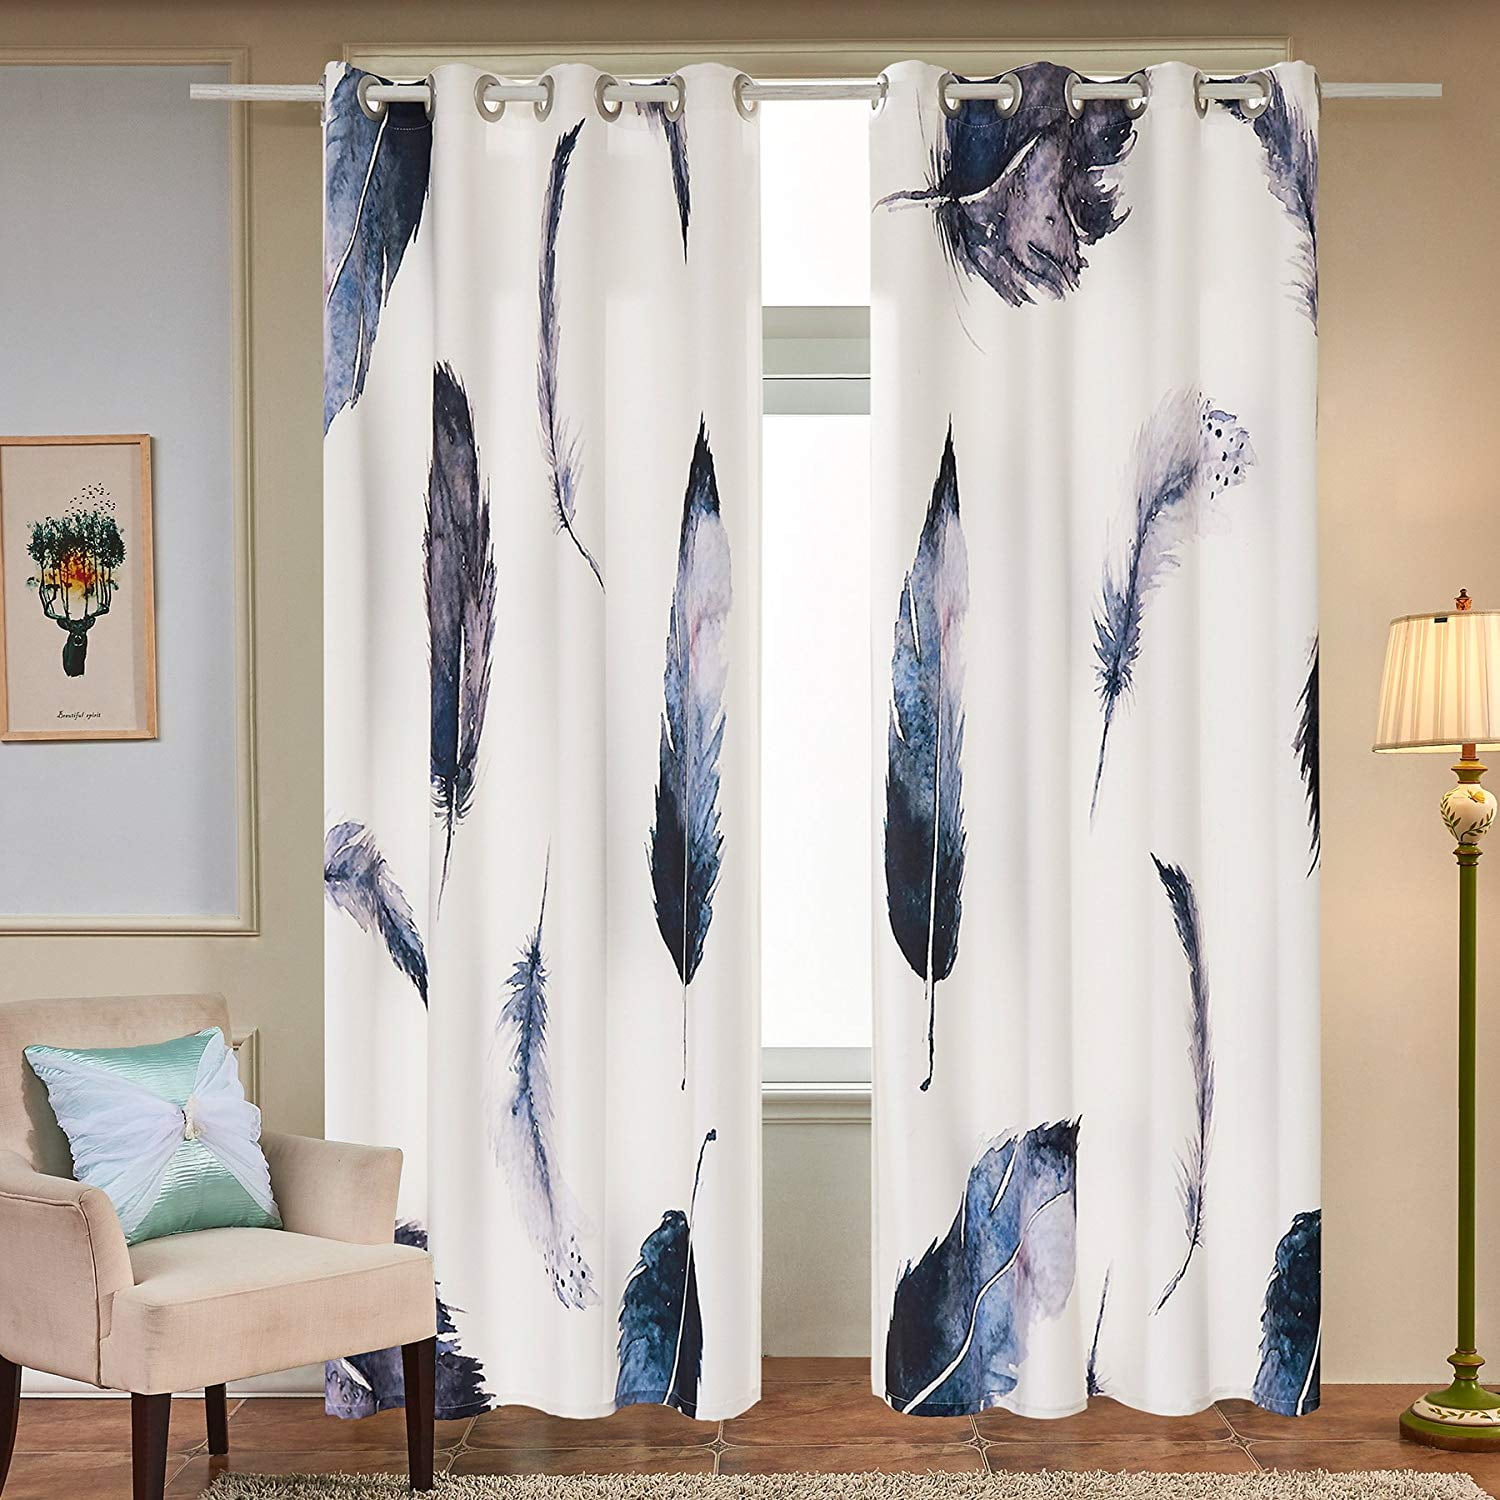 2 Panels Feather Embroidery Curtain Drape Living Room & Bedroom Window Curtains 